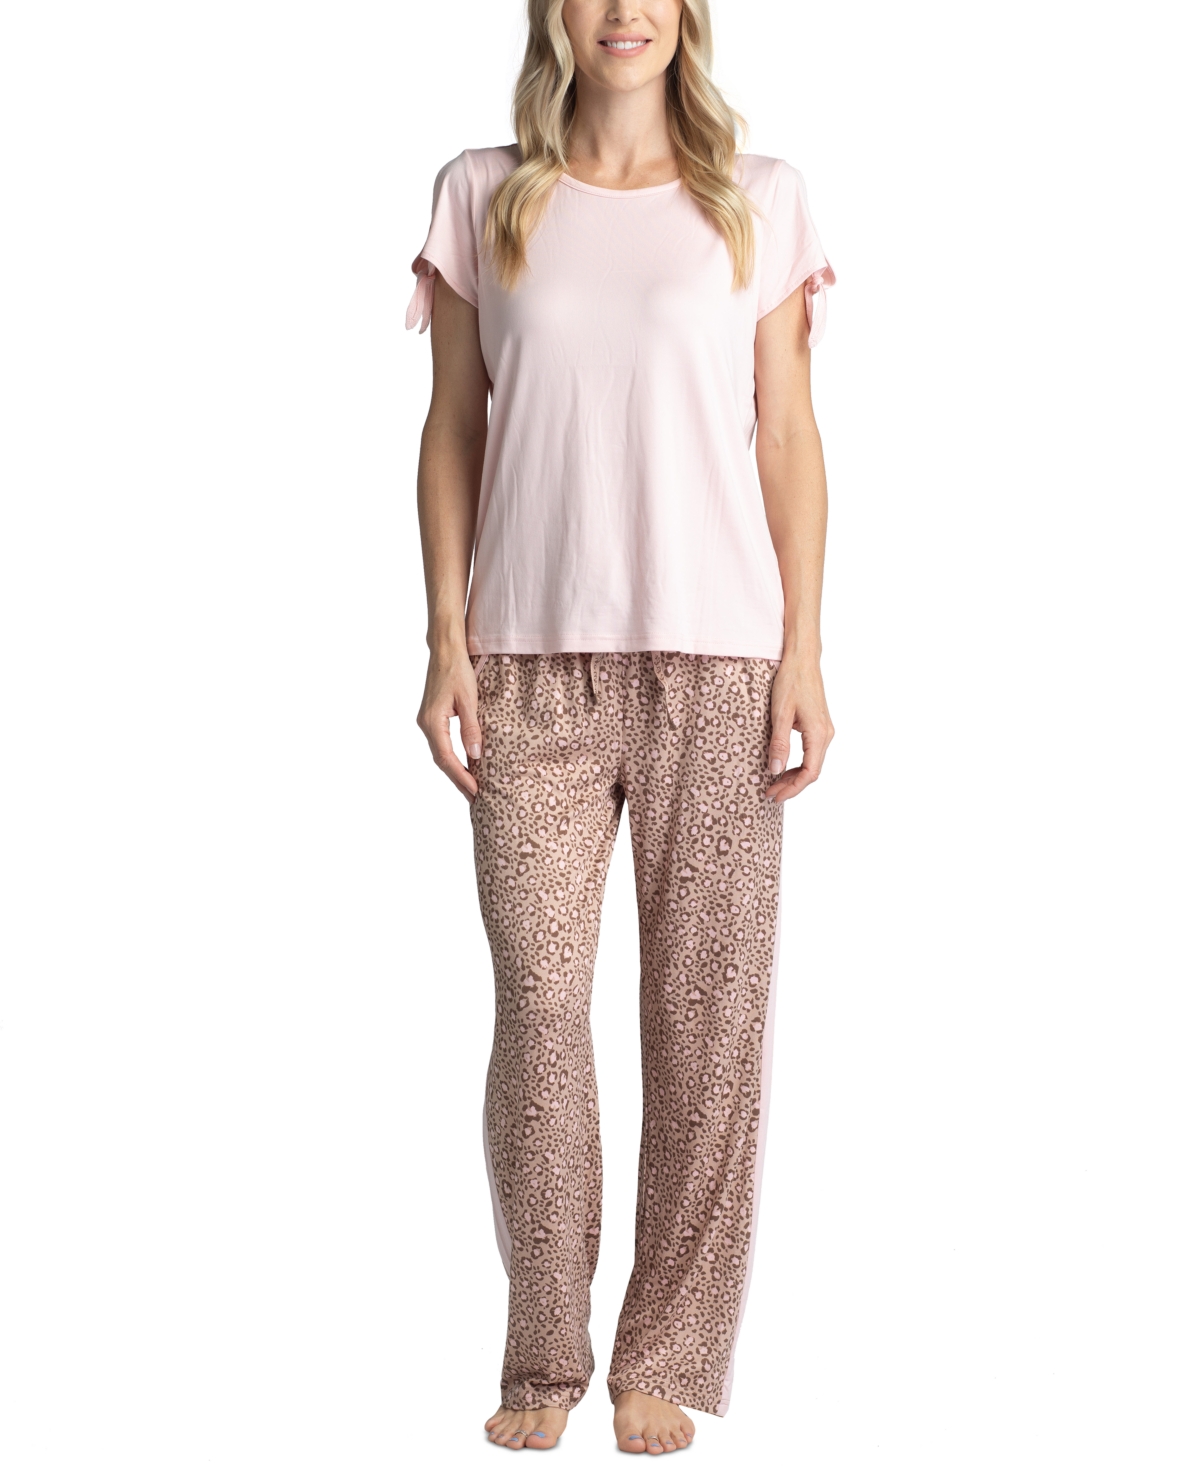 Muk Luks Plus Size Tie-cuff Split-sleeve Top & Open-leg Pajama Pants Set In Pink With Cocoa Animal